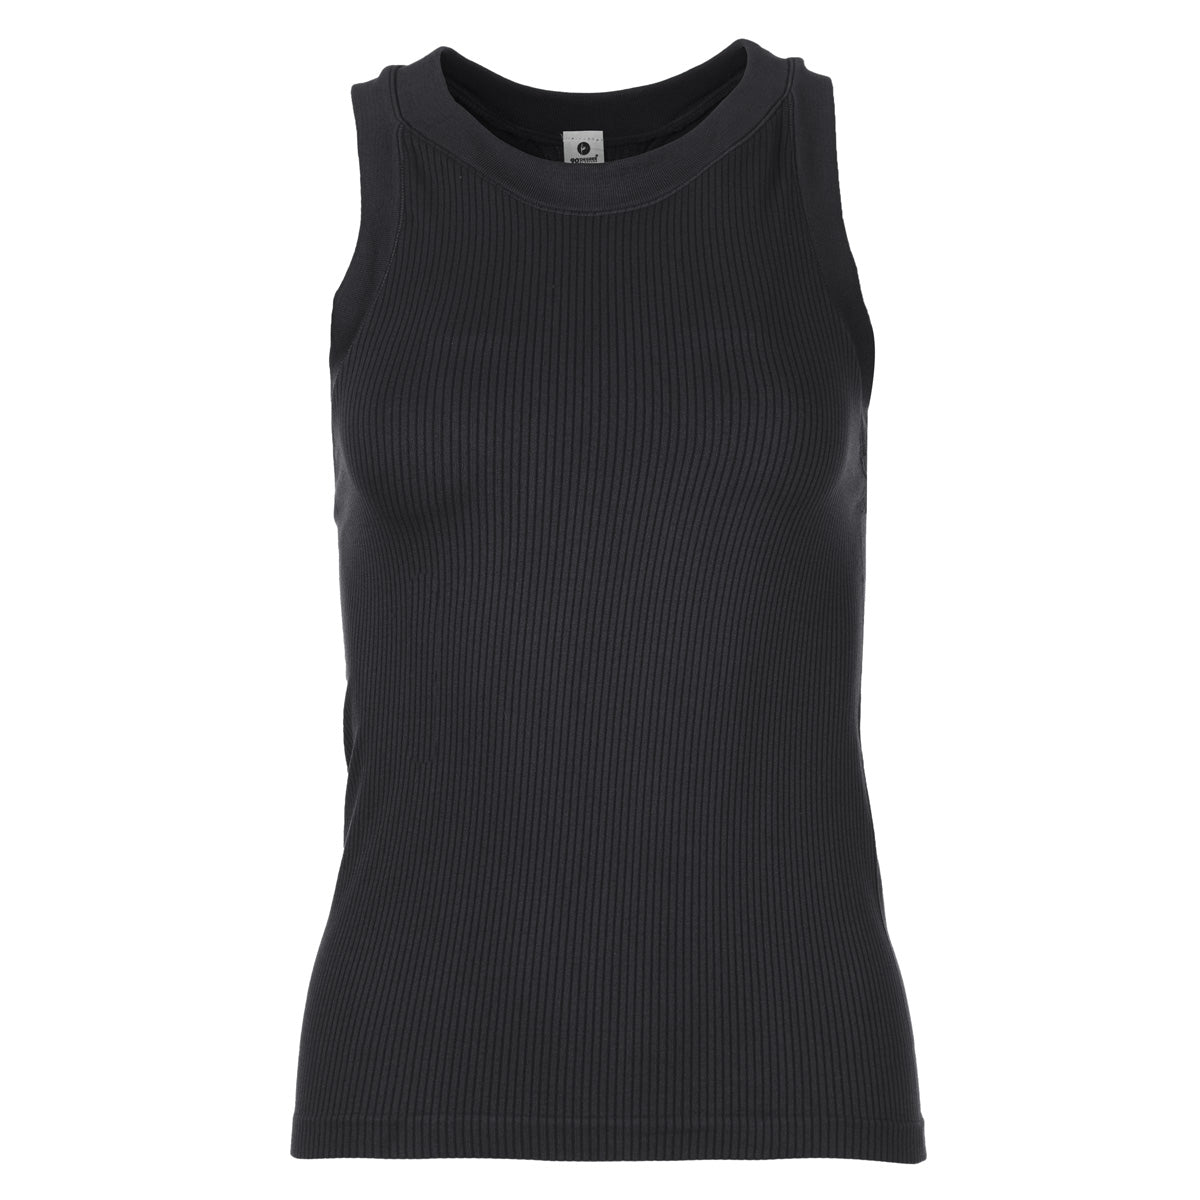 90 Degree by Reflex 2-Pack Ribbed V Neck Tank Tops on SALE